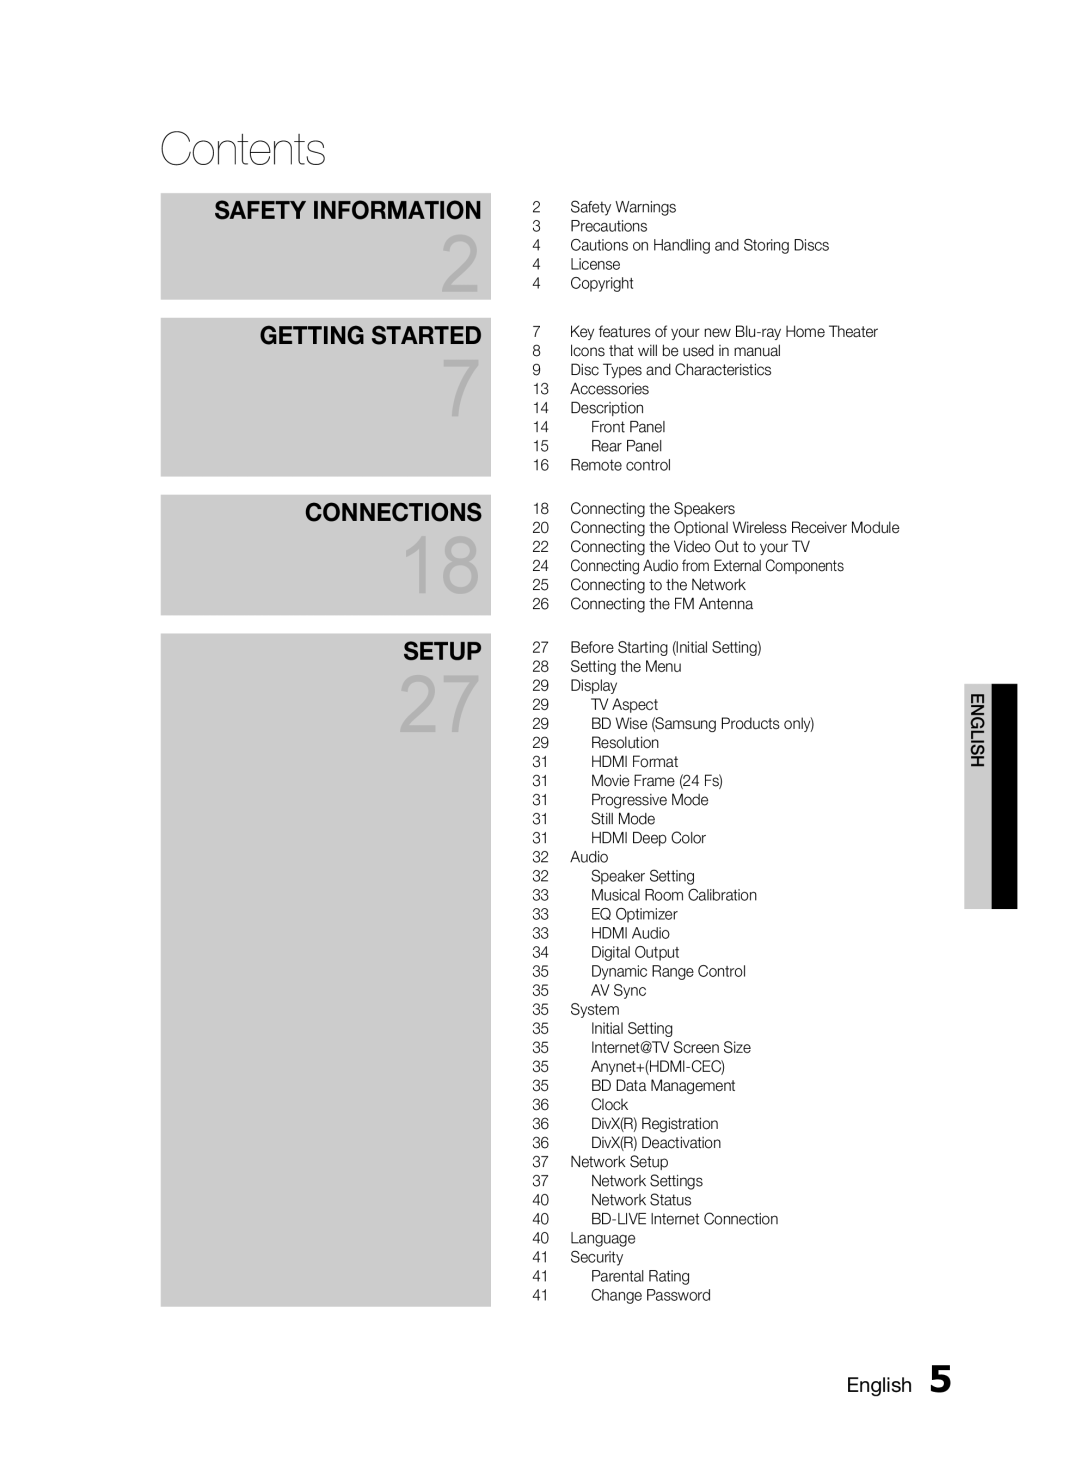 Samsung AH68-02258S, HT-C5500 user manual Contents, Getting Started, Connections, Setup, Safety Information, English 